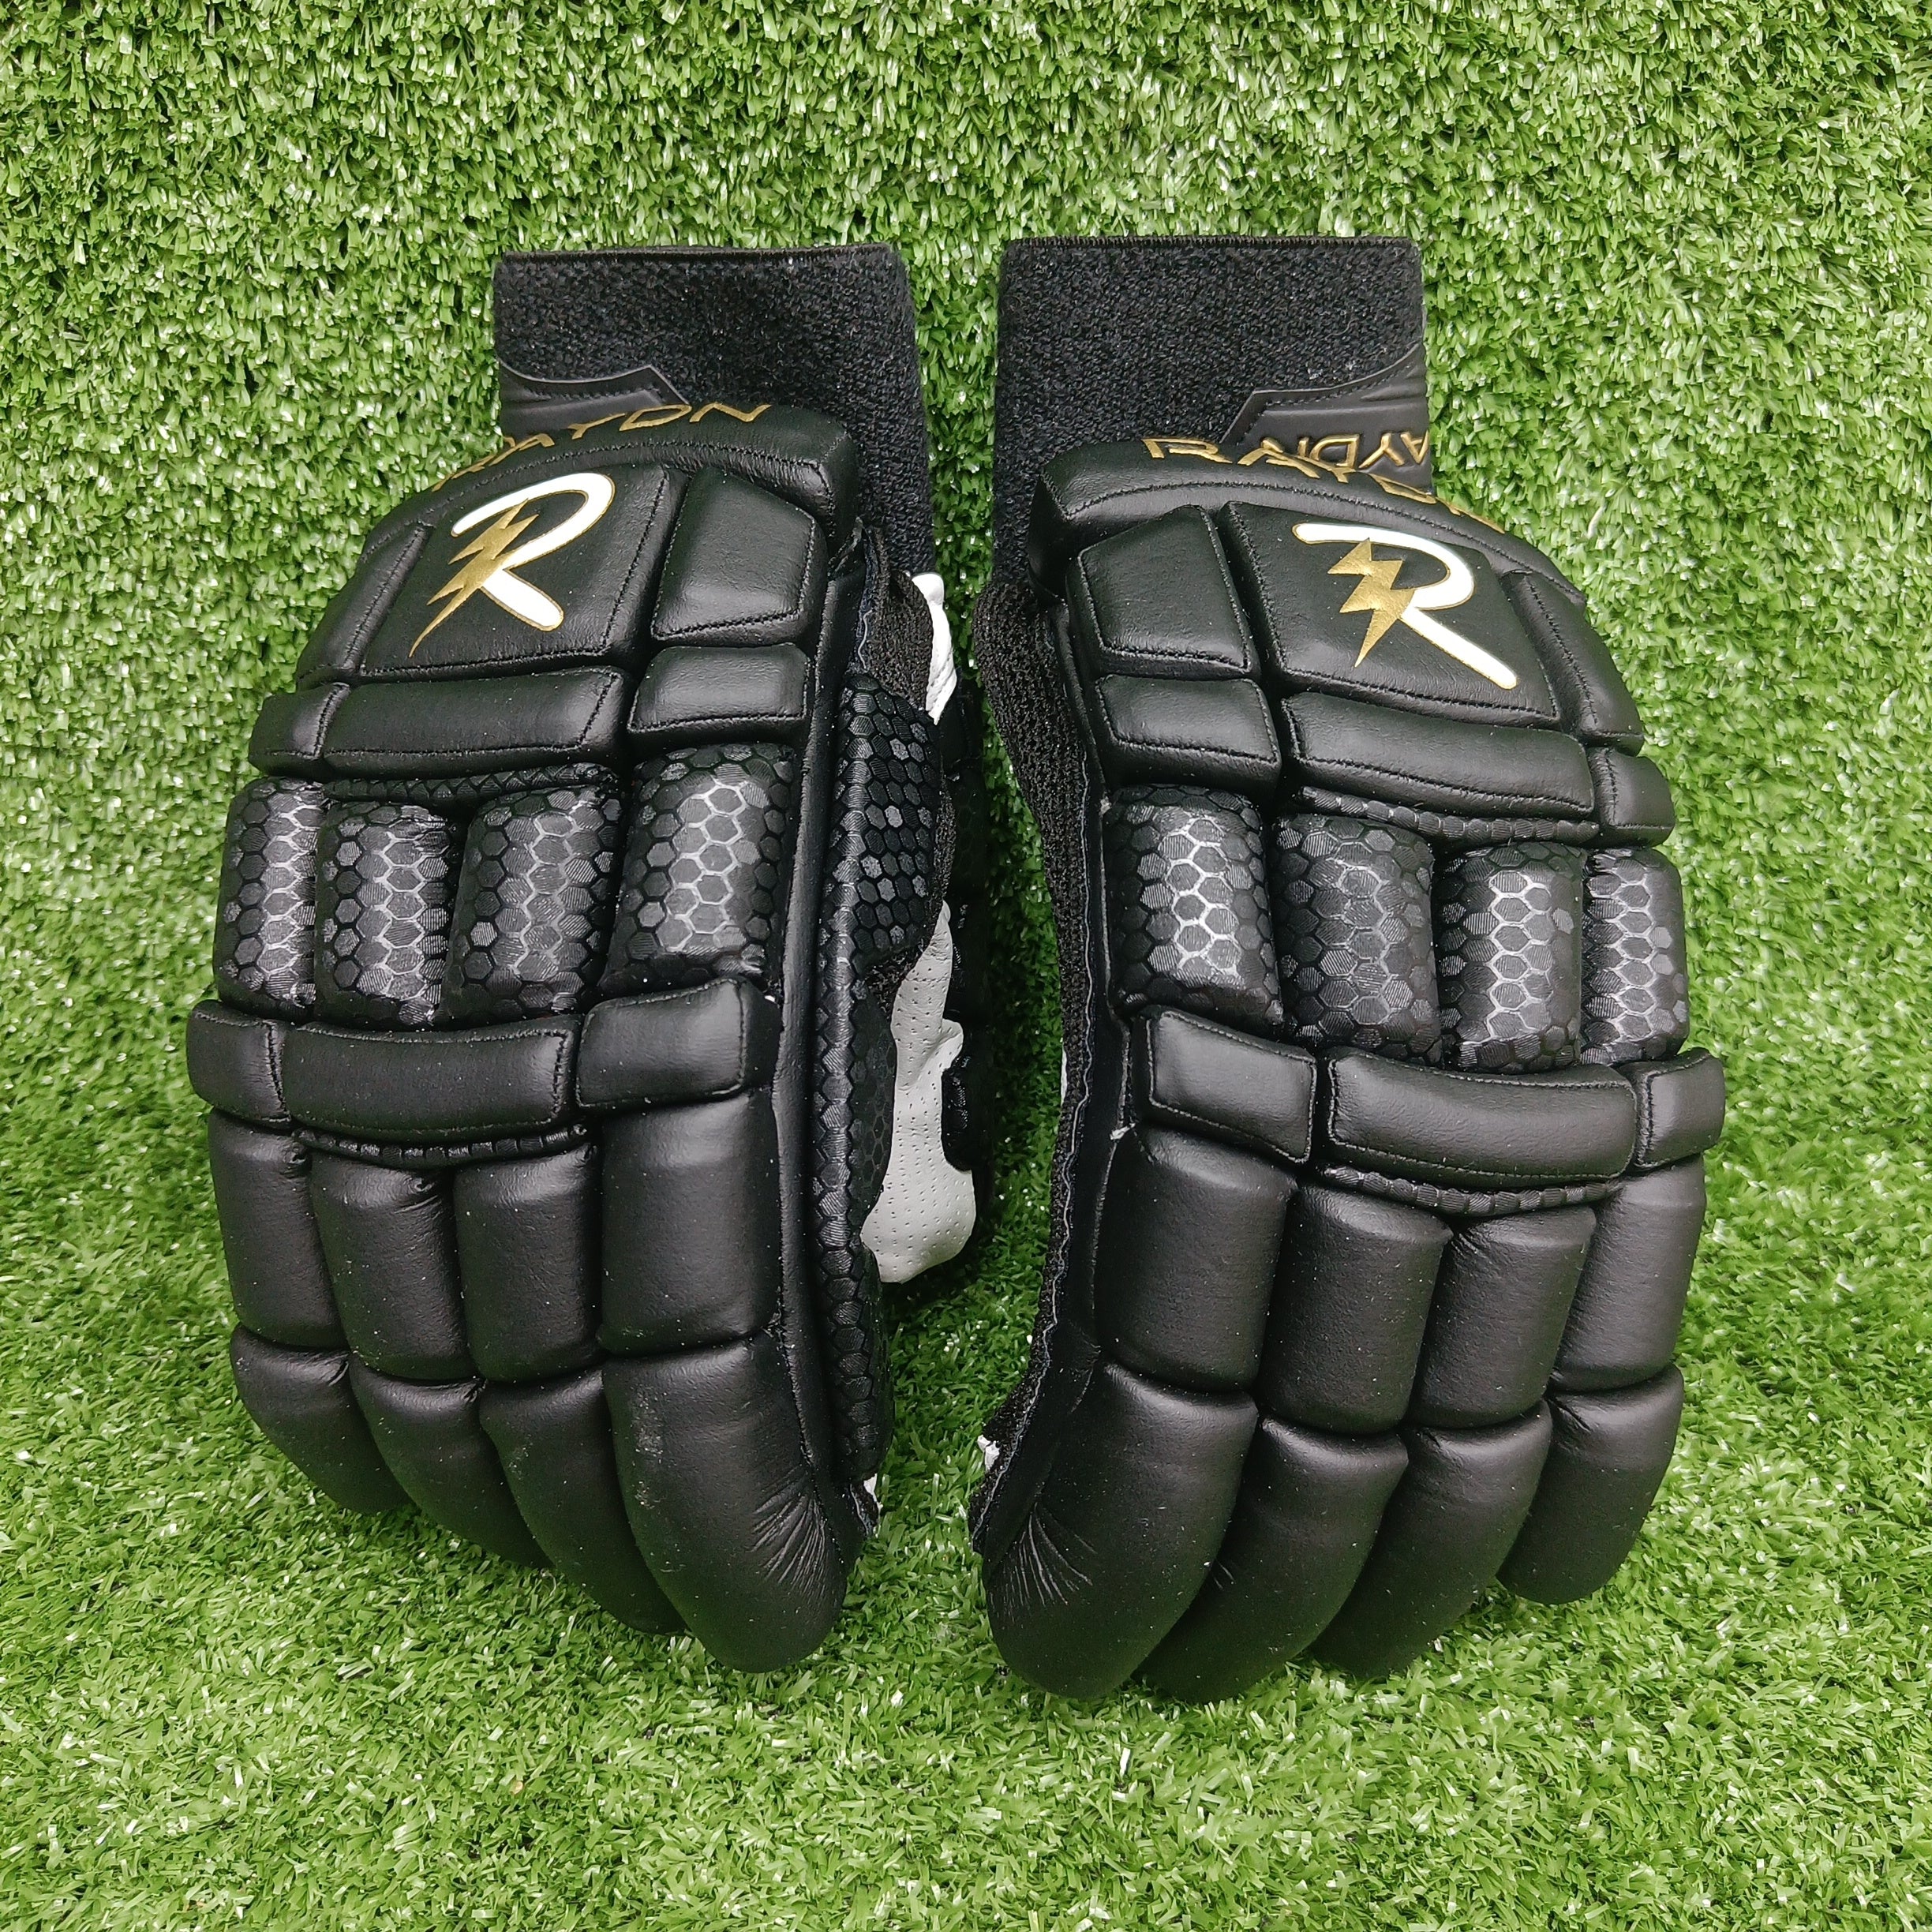 Raydn Players Edition Adult Cricket Gloves (With Pittard) White / Navy Blue / Black